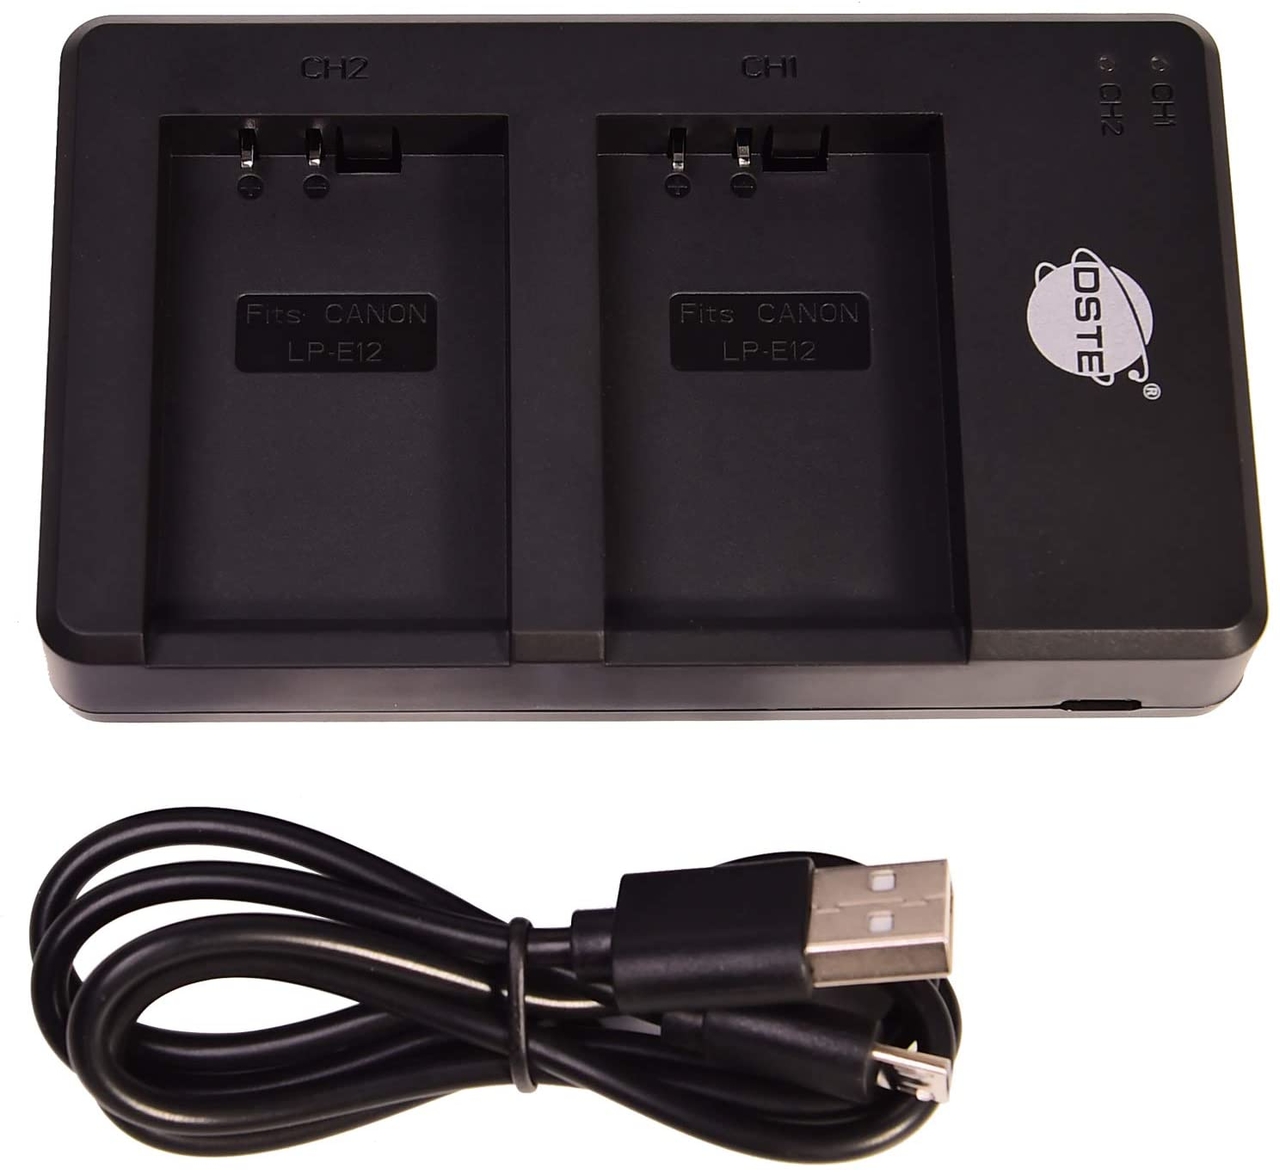 LP-E12 USB dual charger for Canon EOS, Powershot 